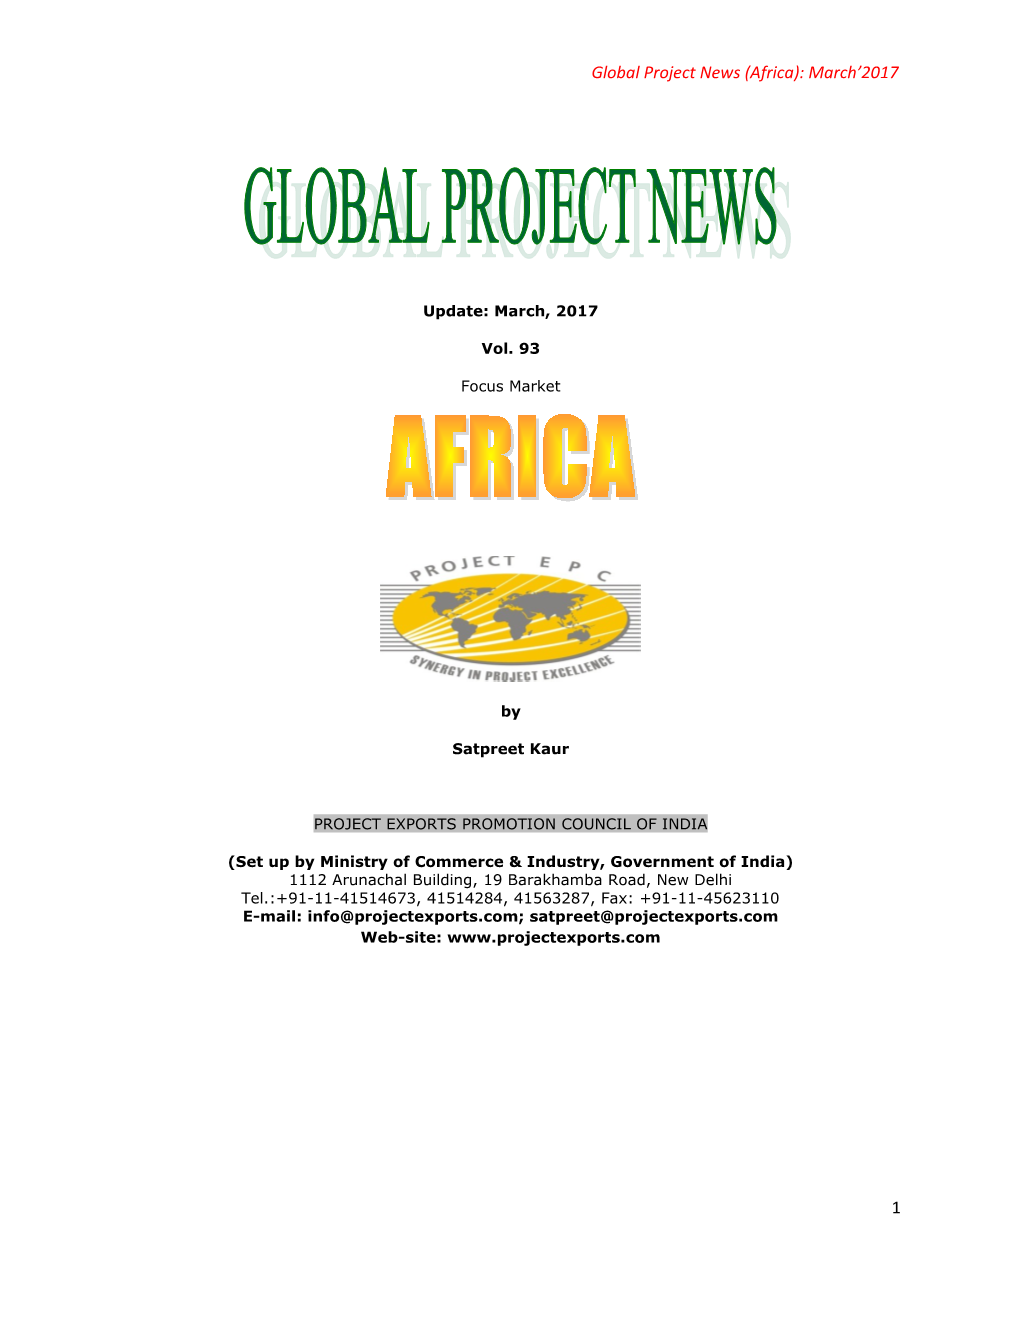 Global Project News (Africa): March 2017